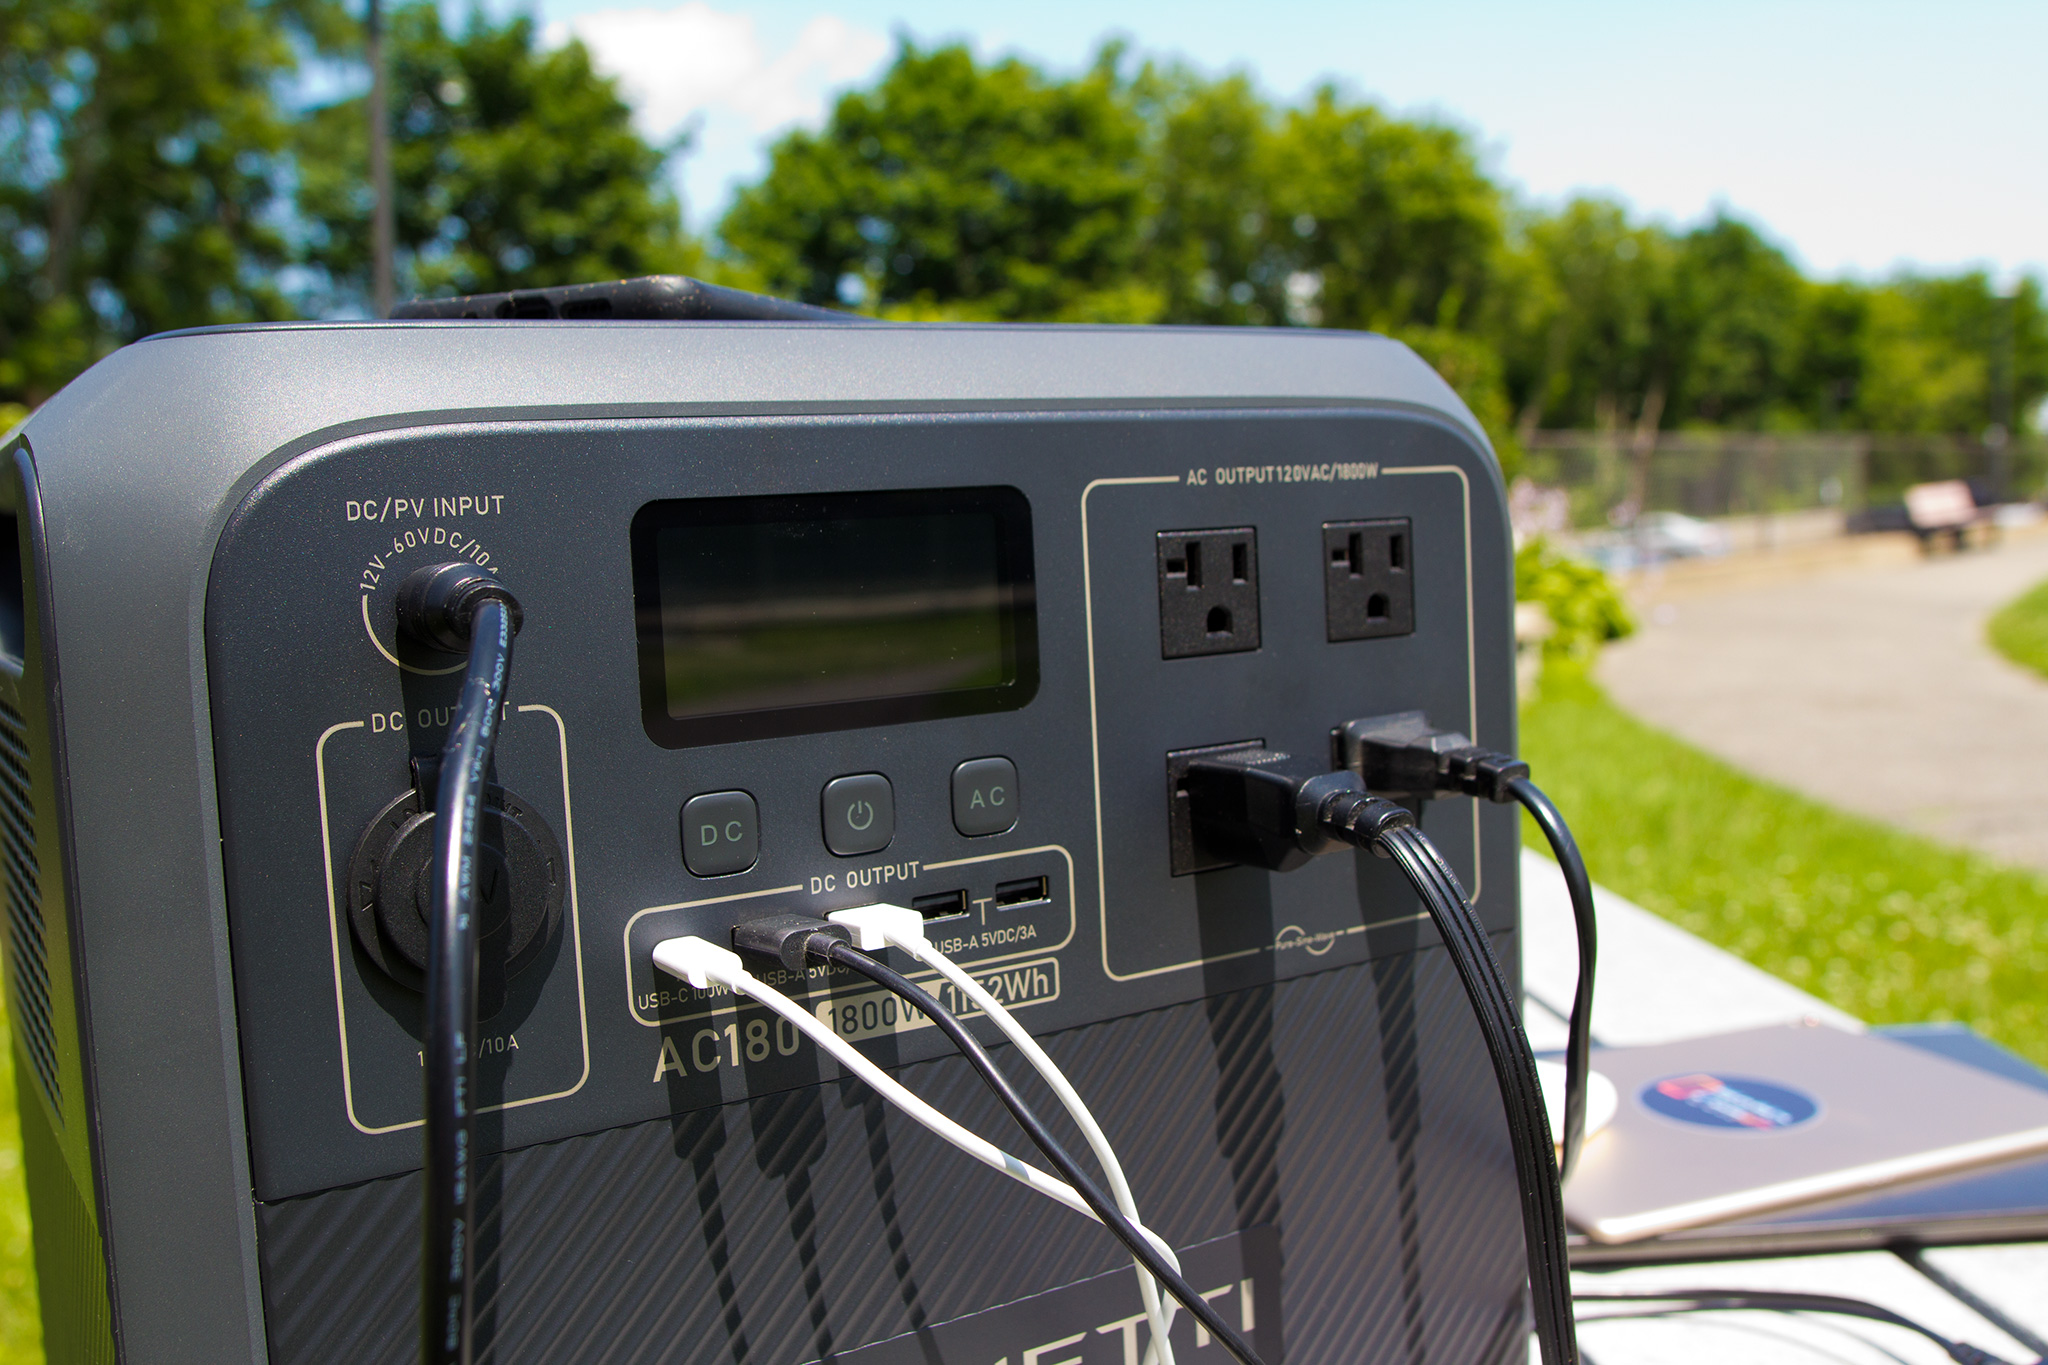 Bluetti AC180 Portable Power Station review - The Gadgeteer